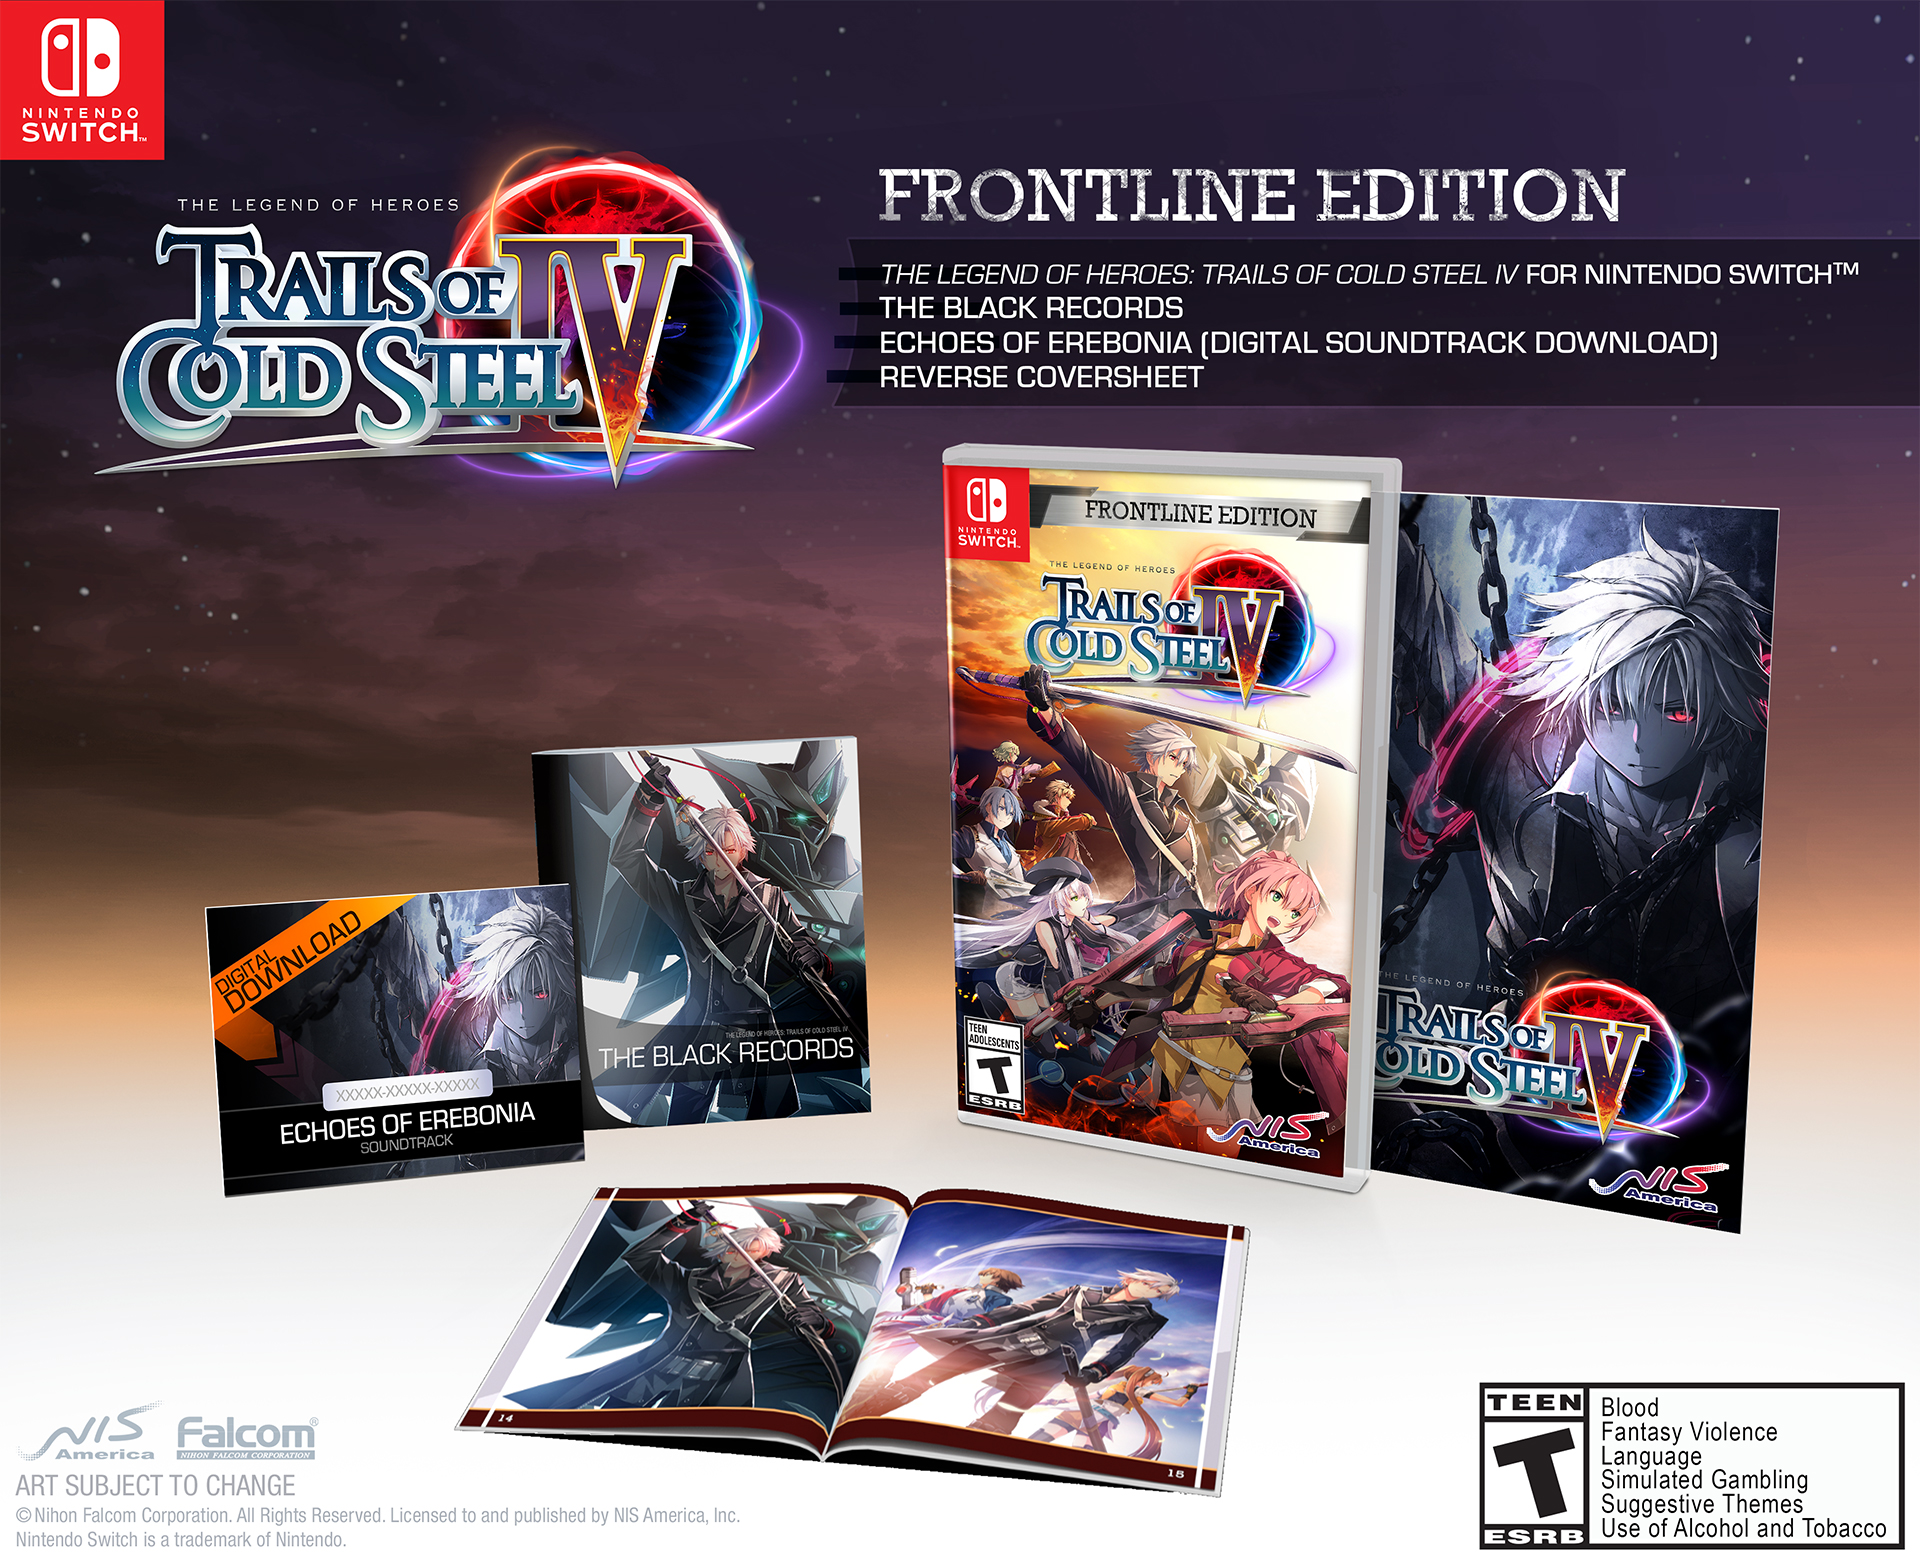 The Legend of Heroes: Trails of Cold Steel IV Limited Edition